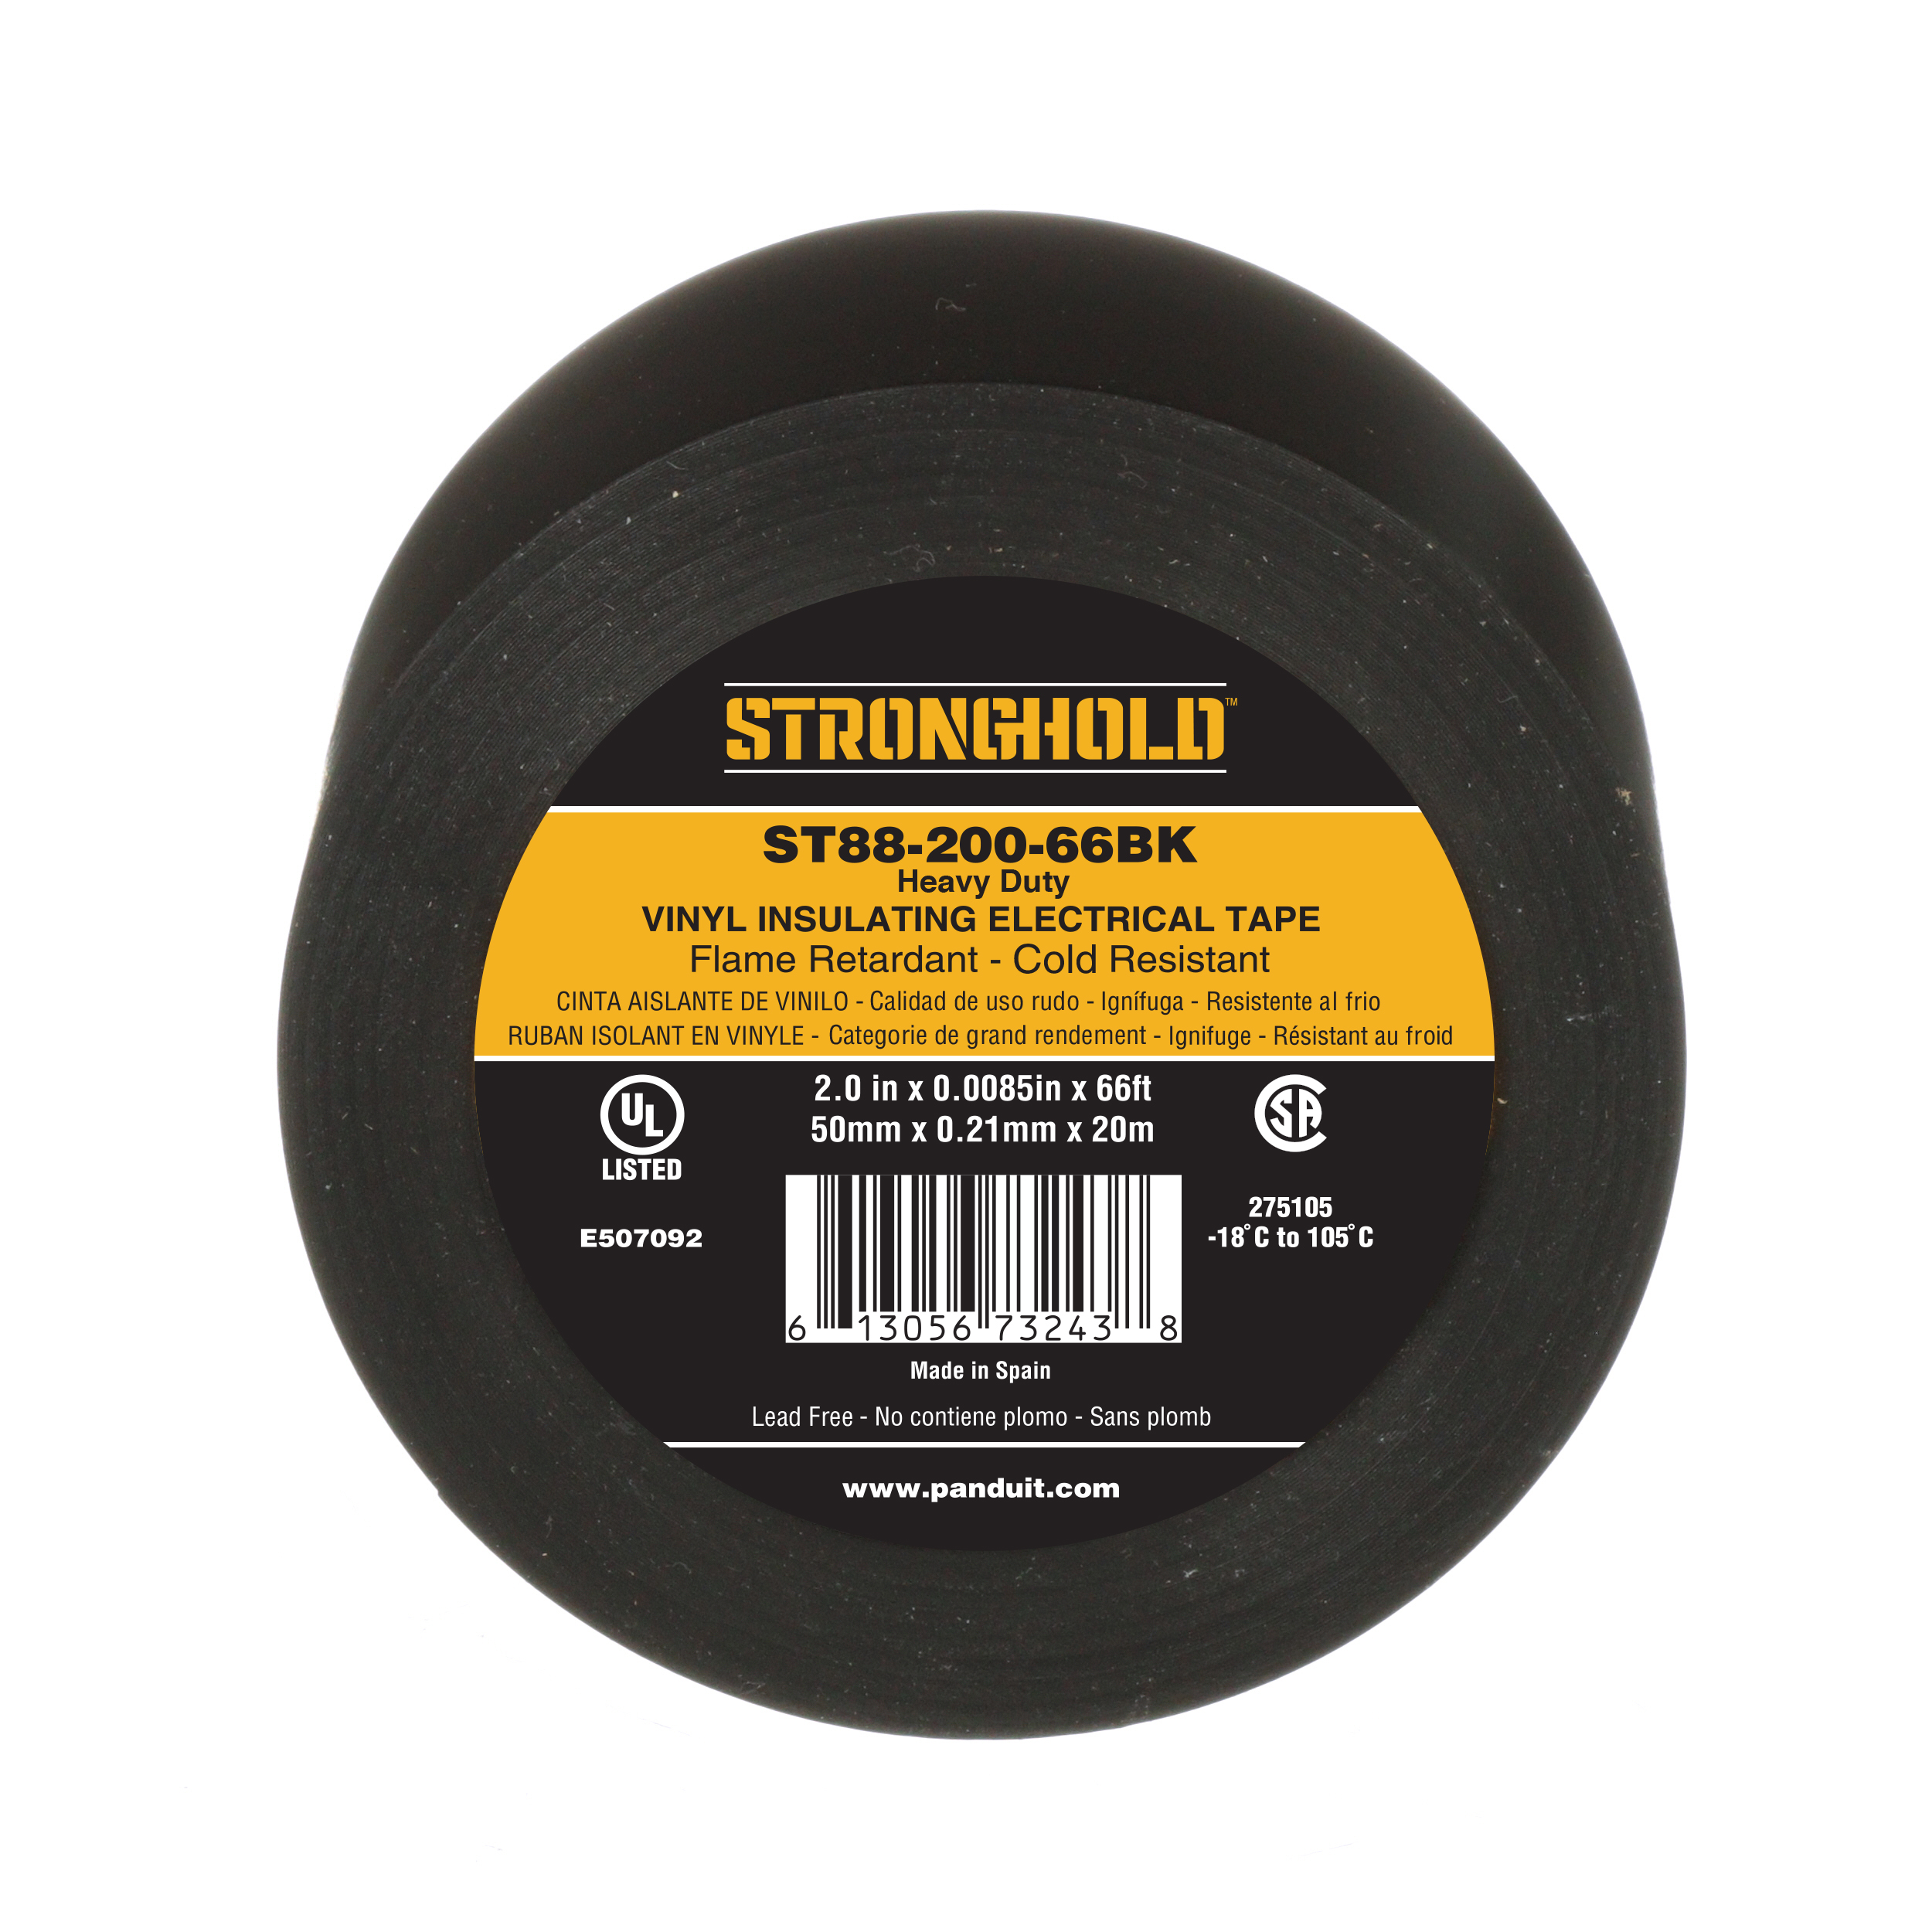 StrongHold™ ST88-200-66BK Electrical Tap